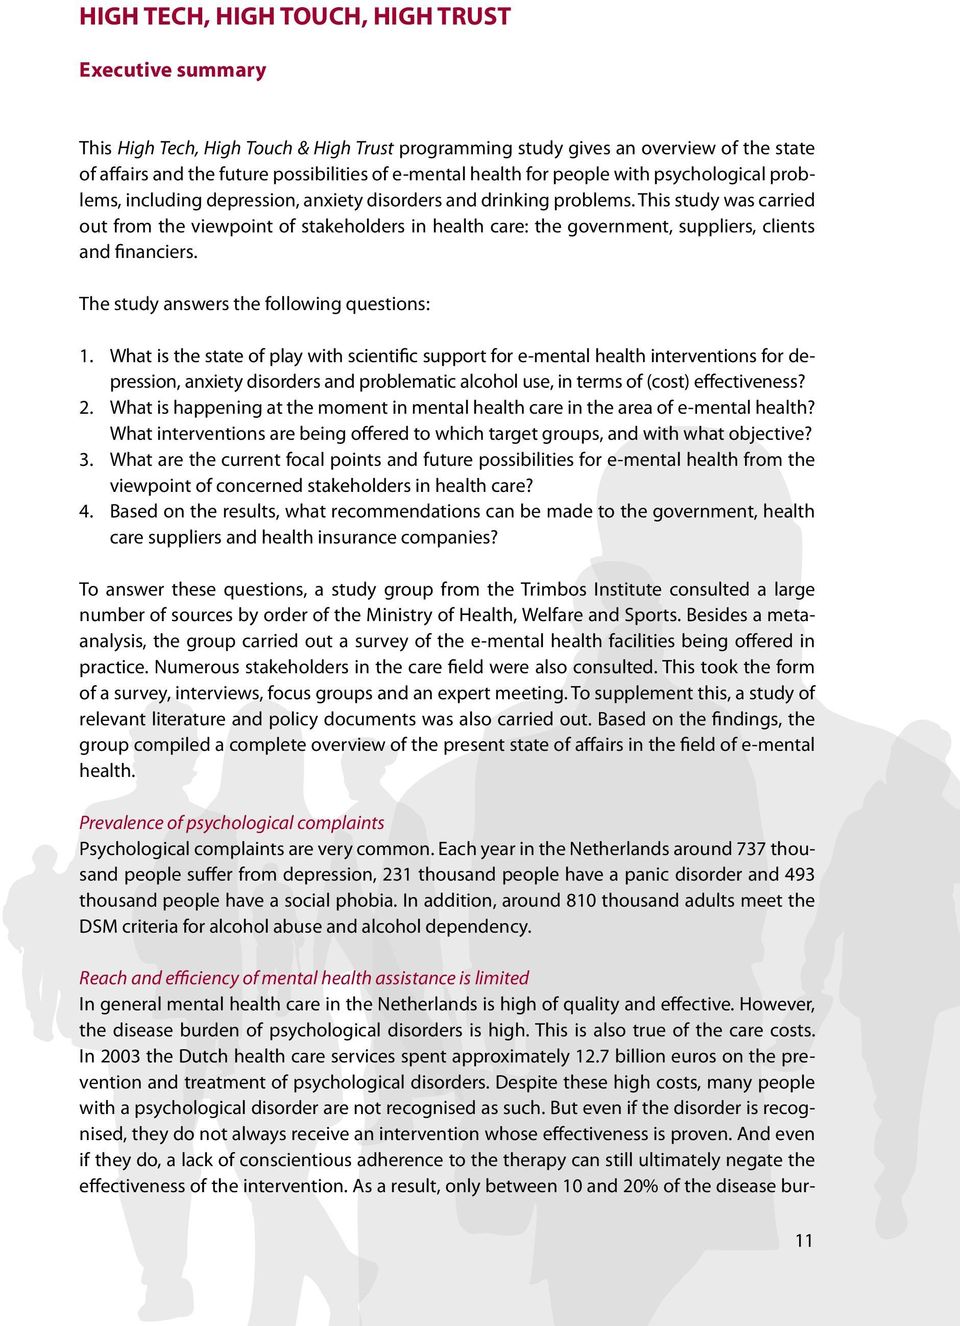 This study was carried out from the viewpoint of stakeholders in health care: the government, suppliers, clients and financiers. The study answers the following questions: 1.